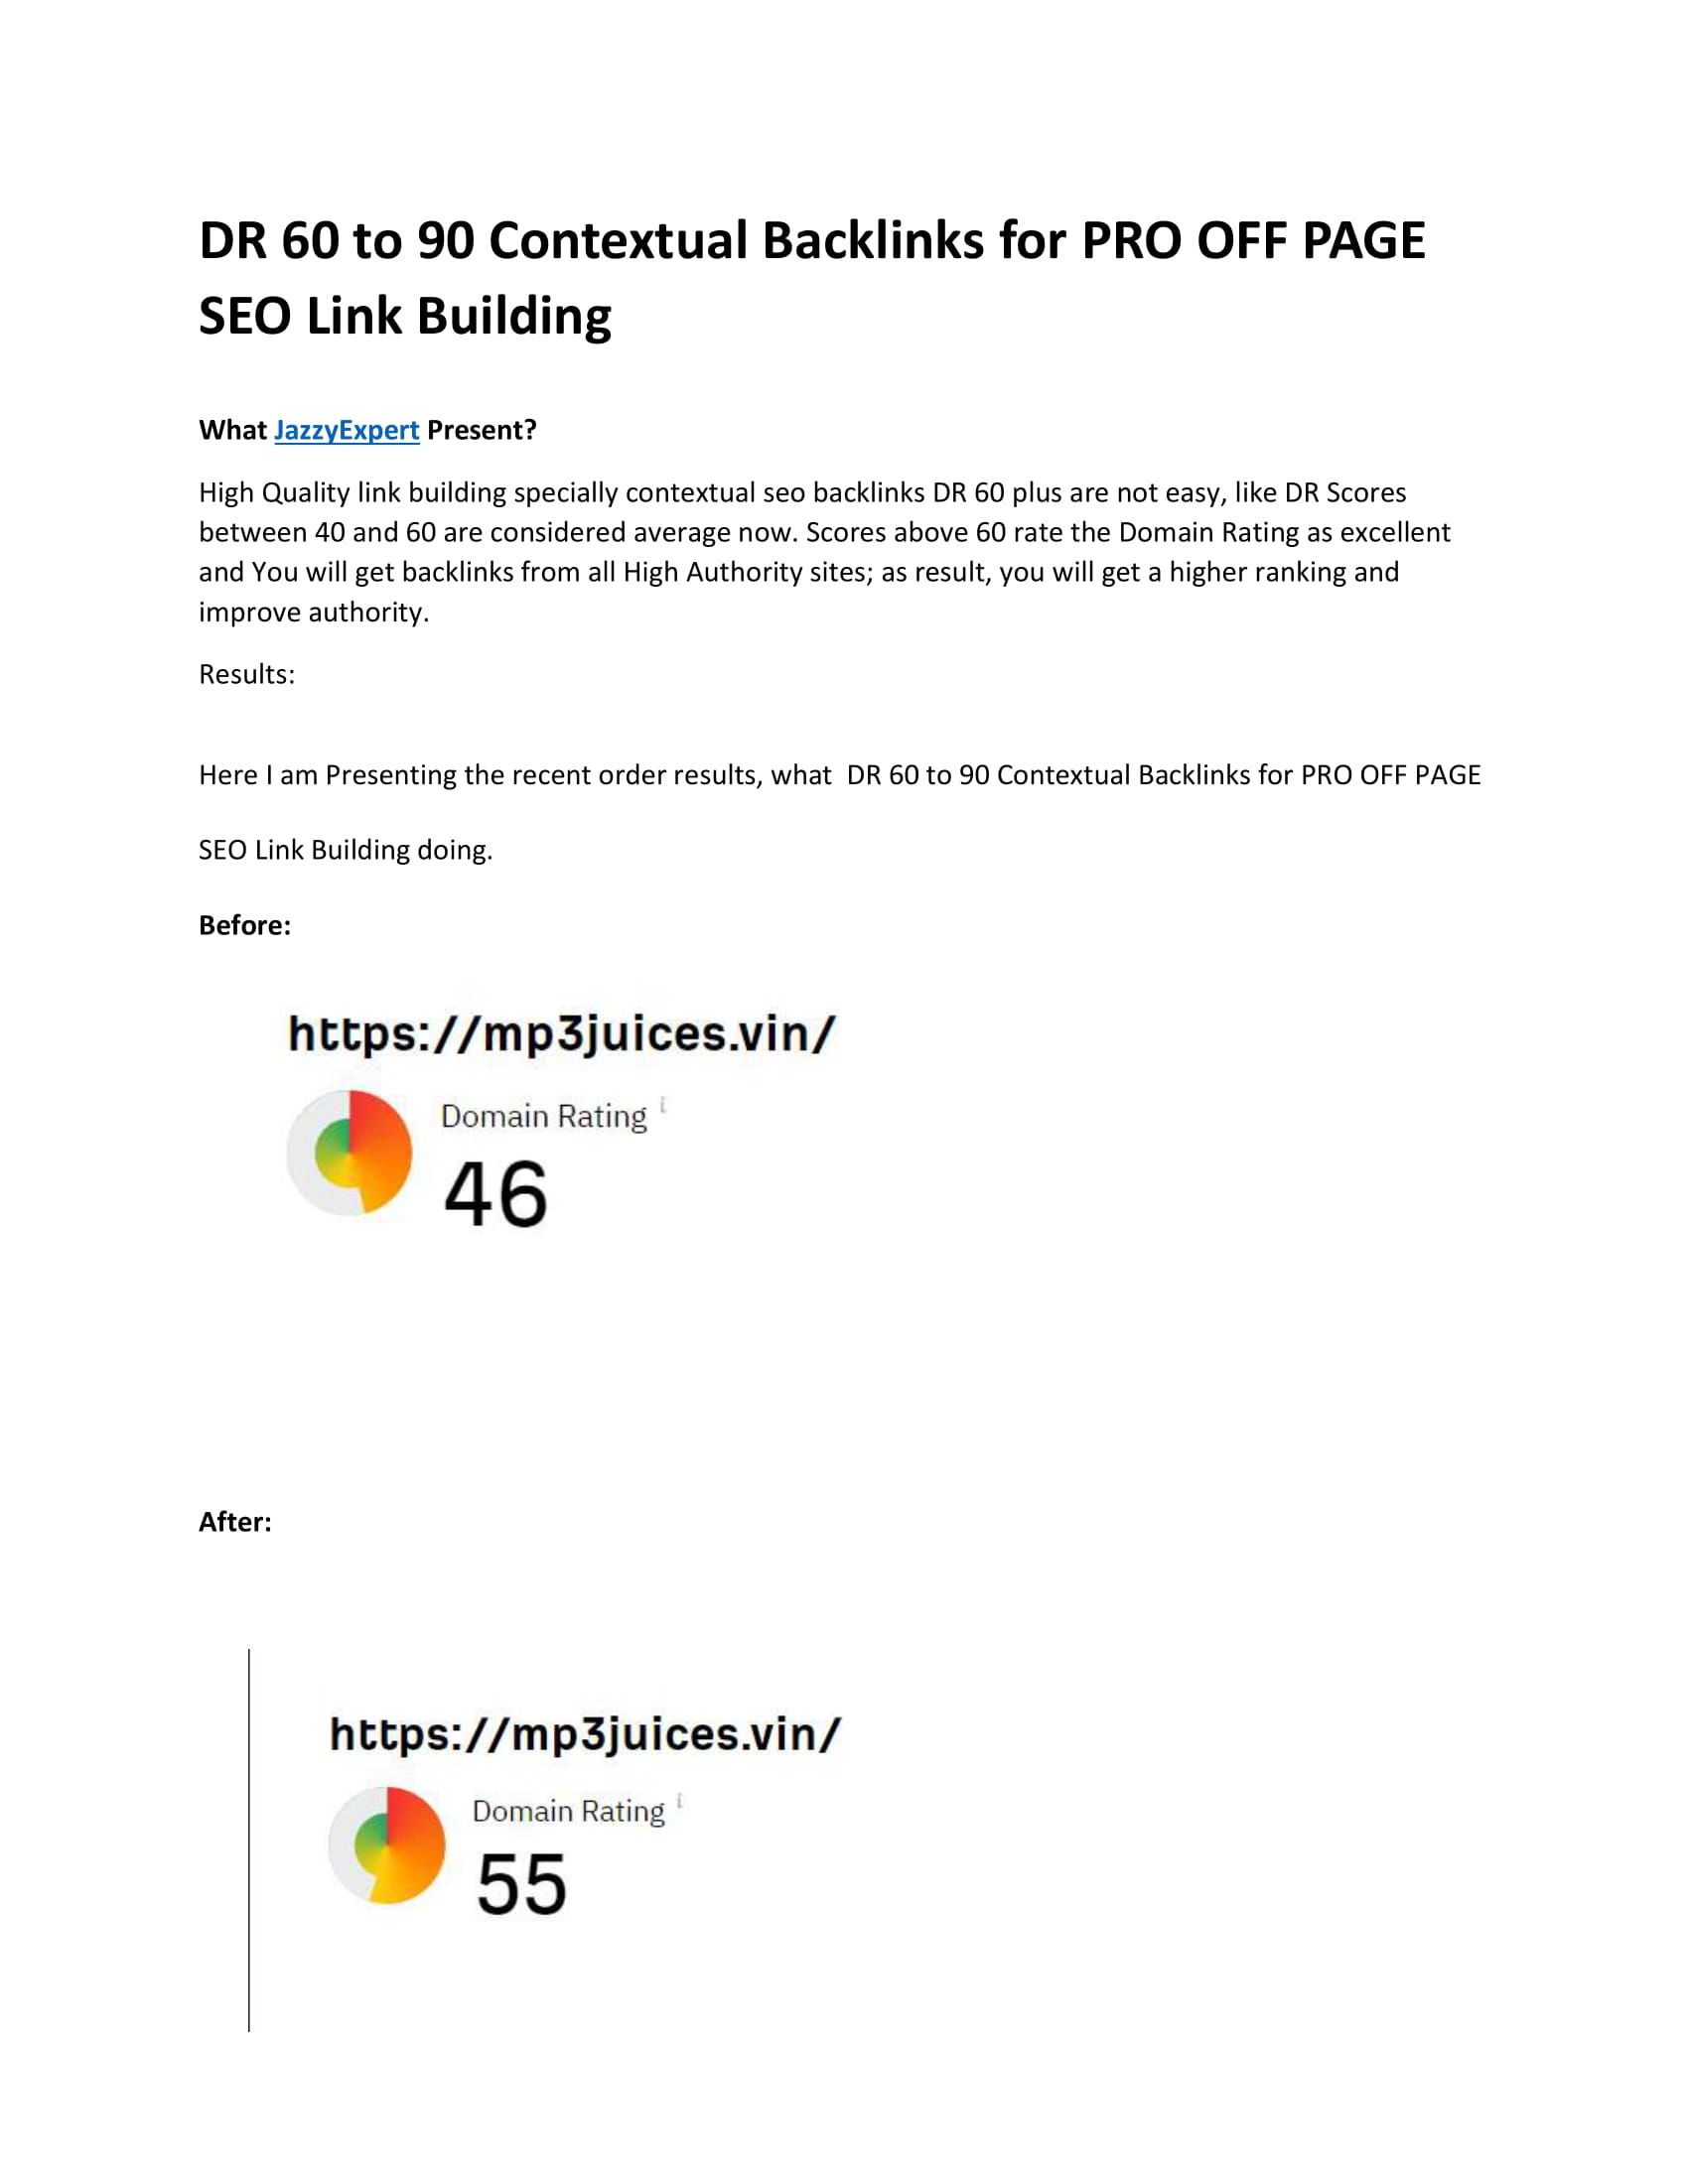 Build DR 60 to 90 contextual backlinks for pro off page SEO White hat link building